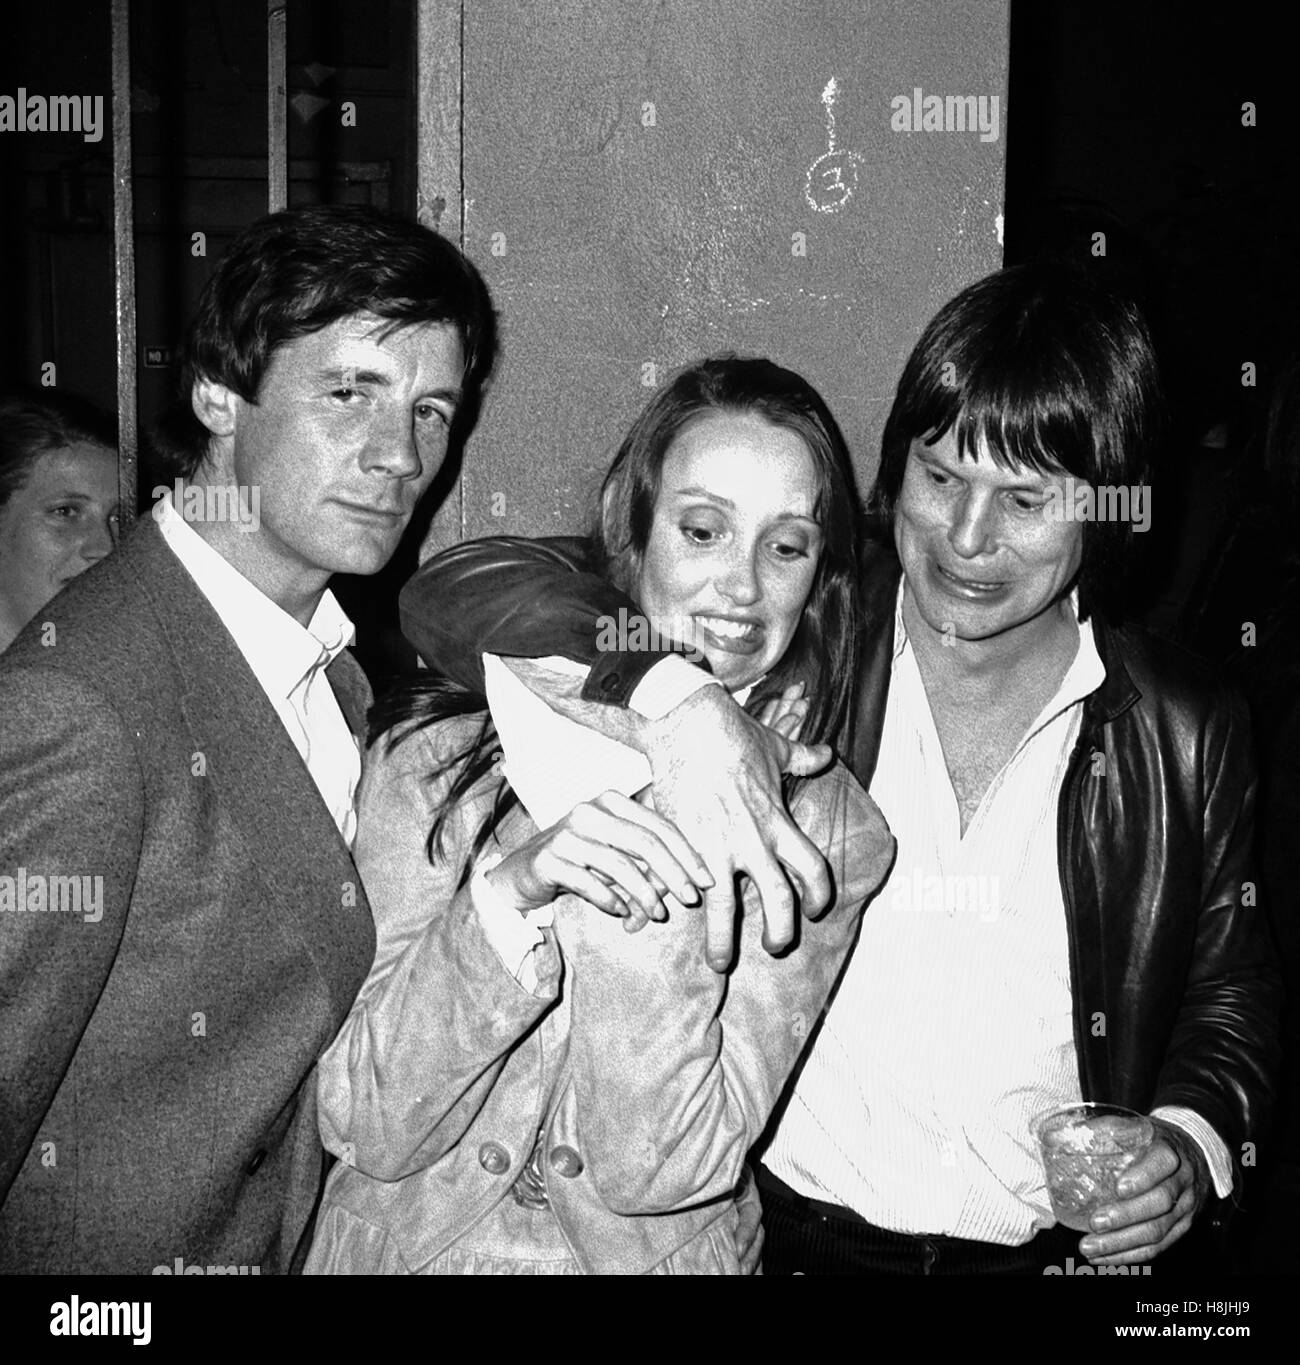 Shelley Duvall with Michael Palin & Terry Gilliam Attending a party celebrating the release of TIME BANDITS at the Underground Disco in New York City. January 4, 1981 © RTMcbride / MediaPunch Stock Photo